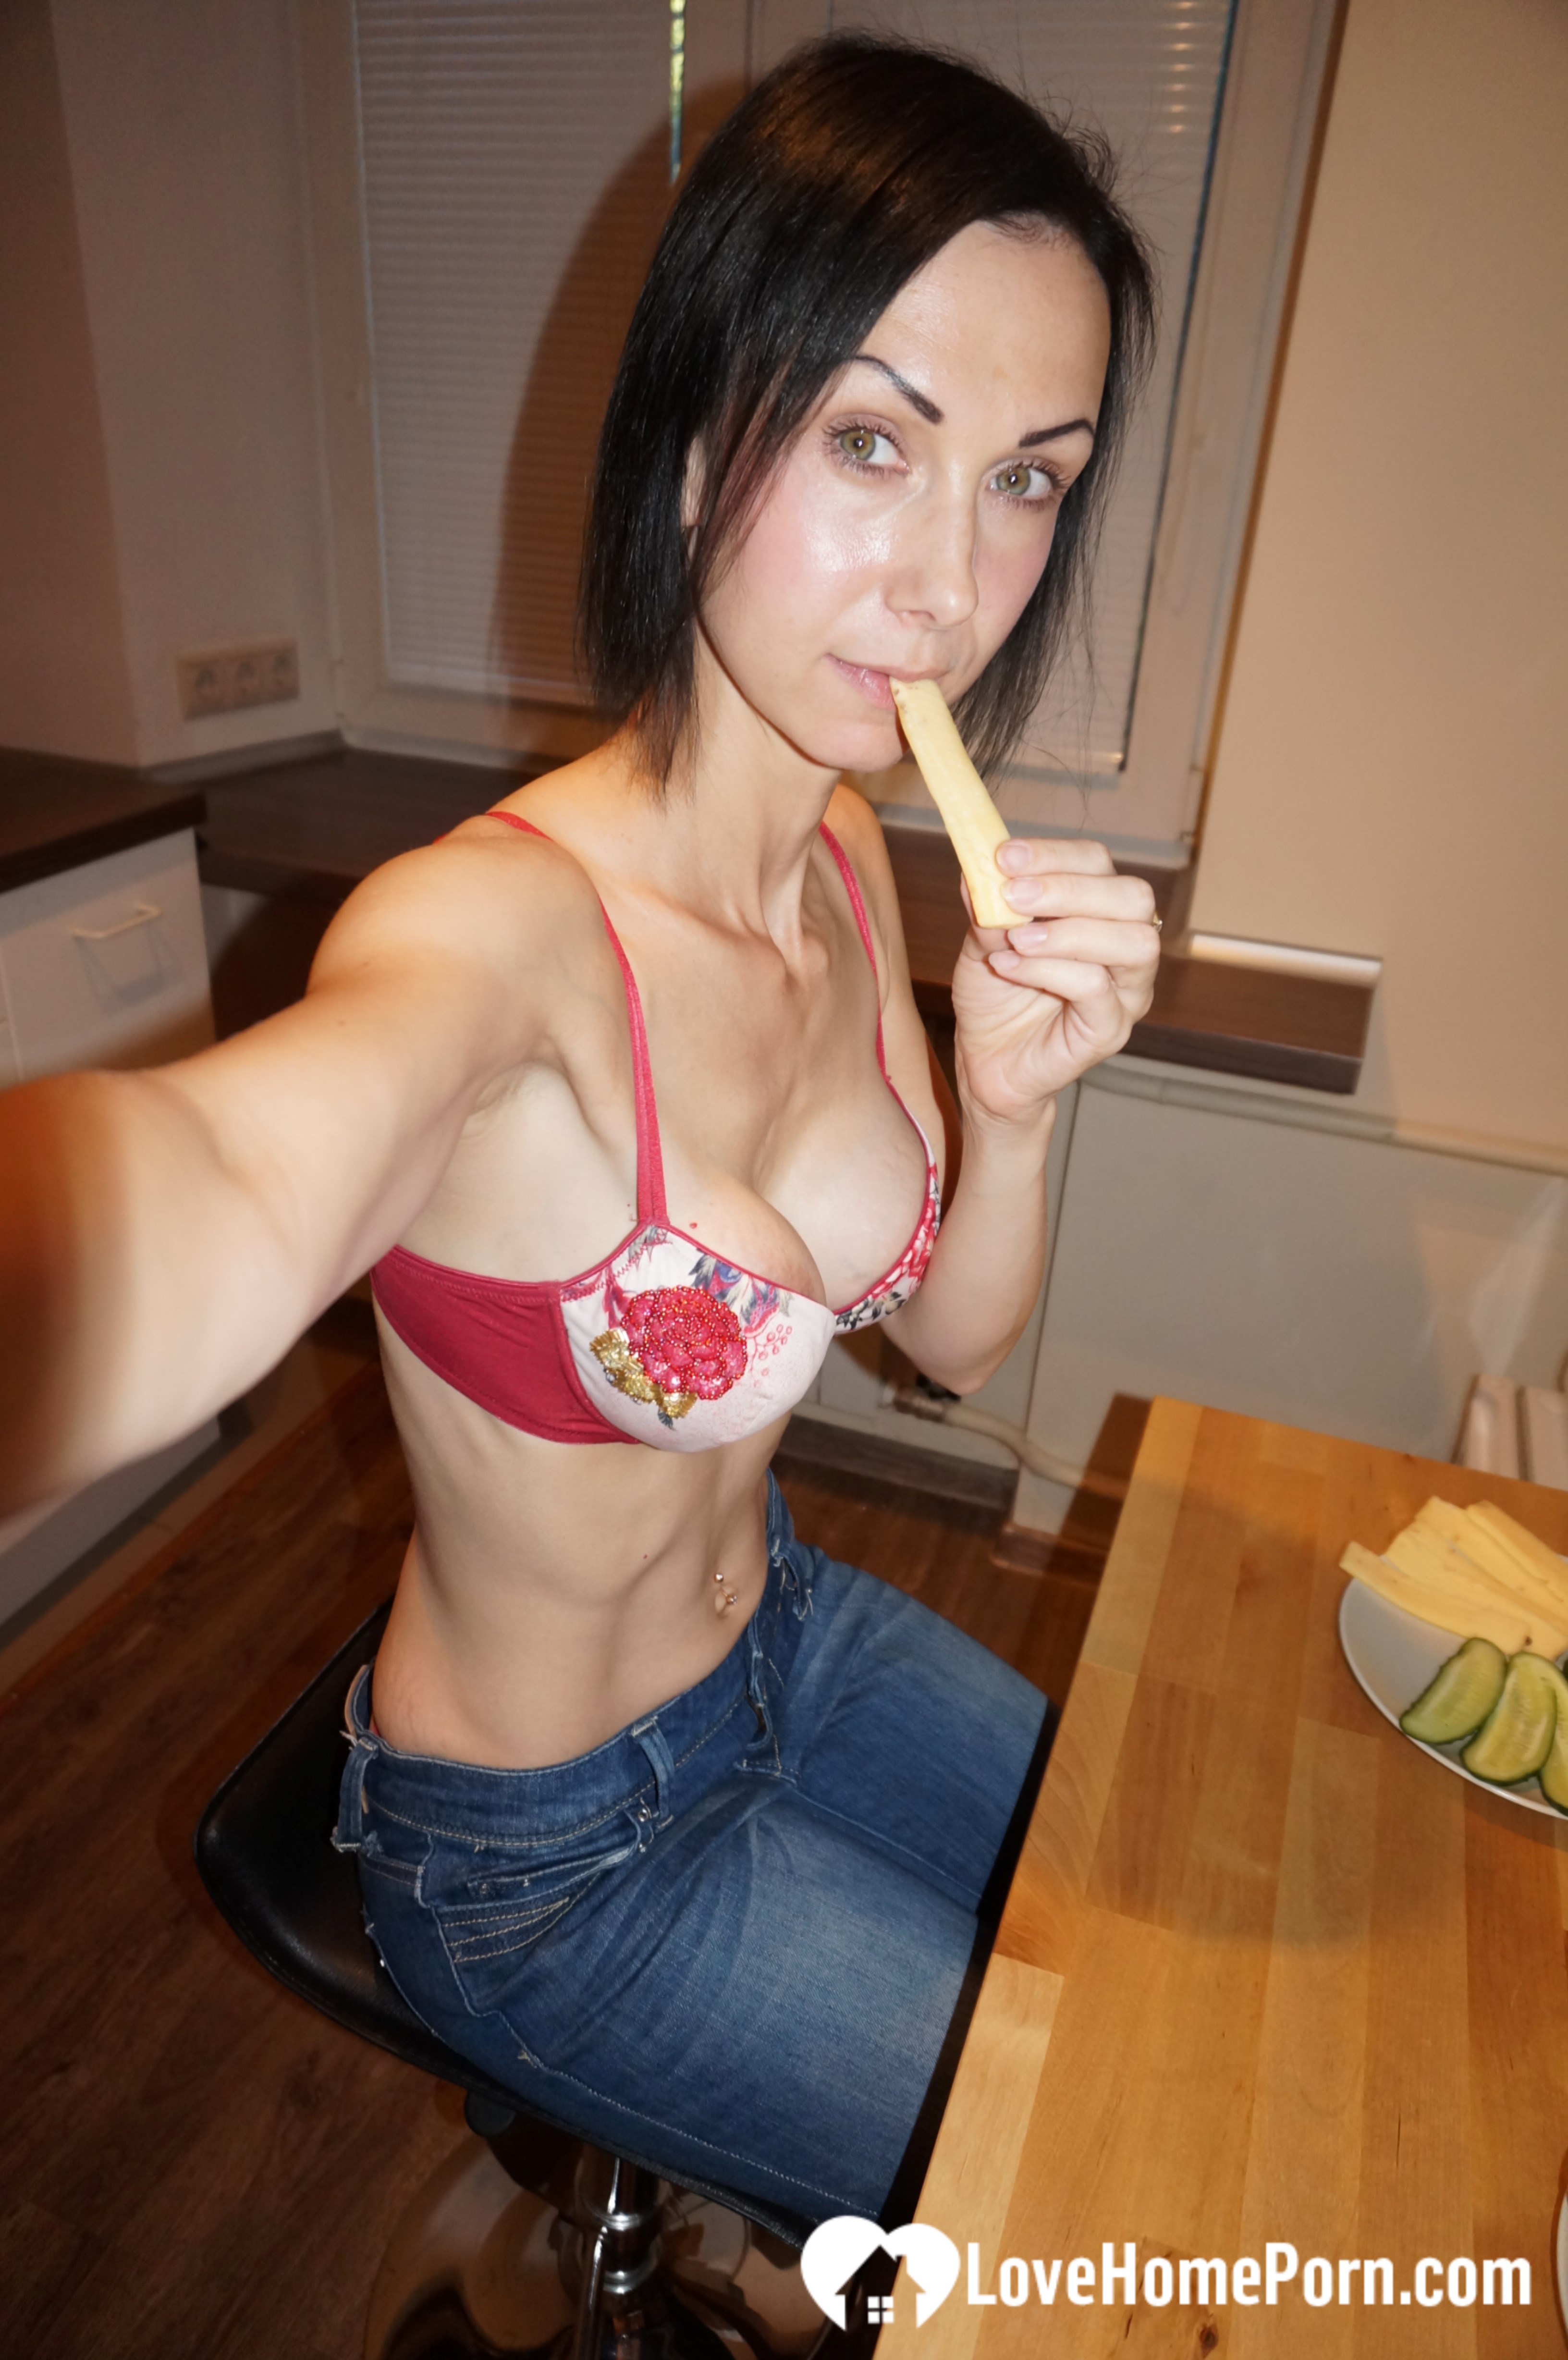 Skinny MILF shows off her fake tits